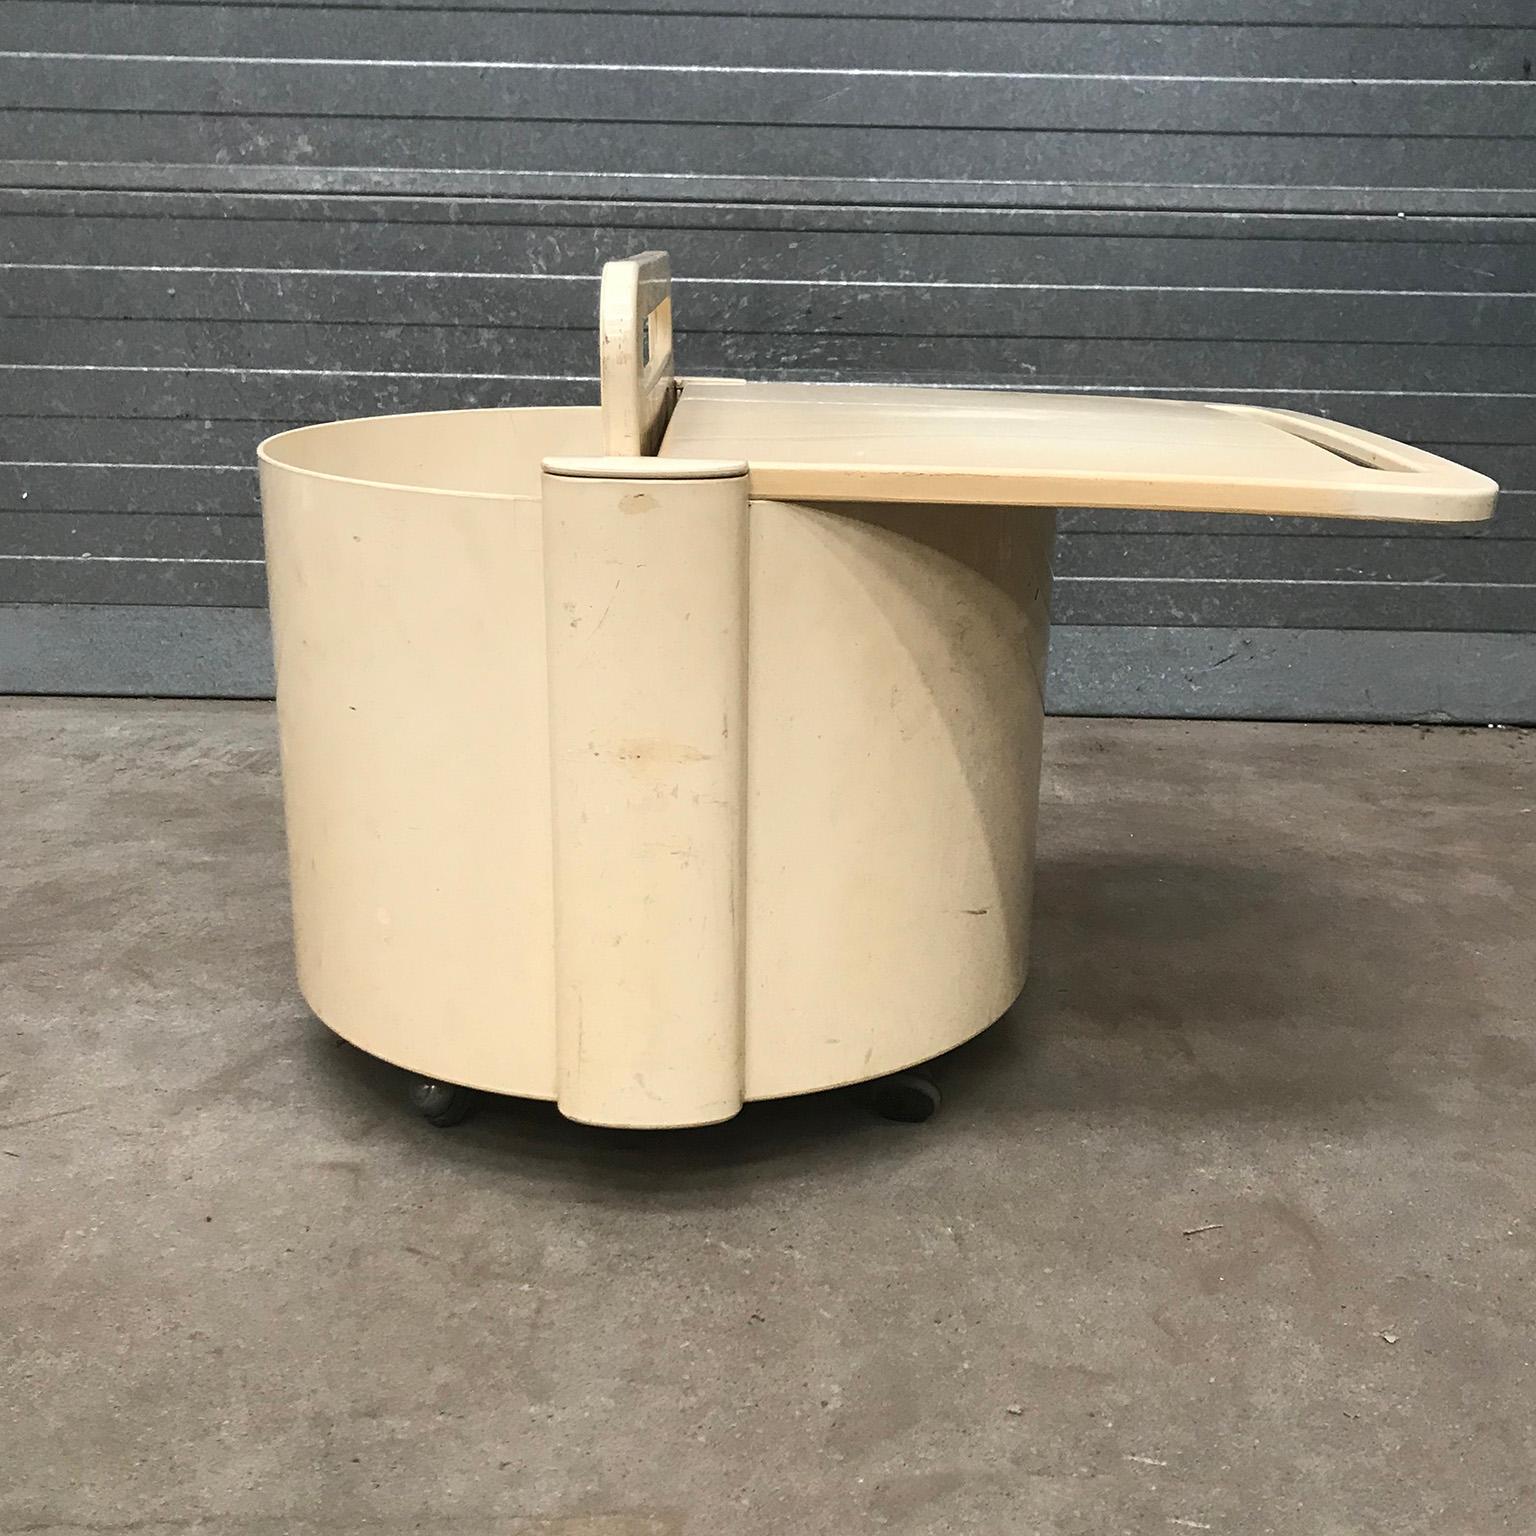 Mobile 1970s Plastic Vintage Space Age Bar in Off-White, circa 1970 For Sale 2